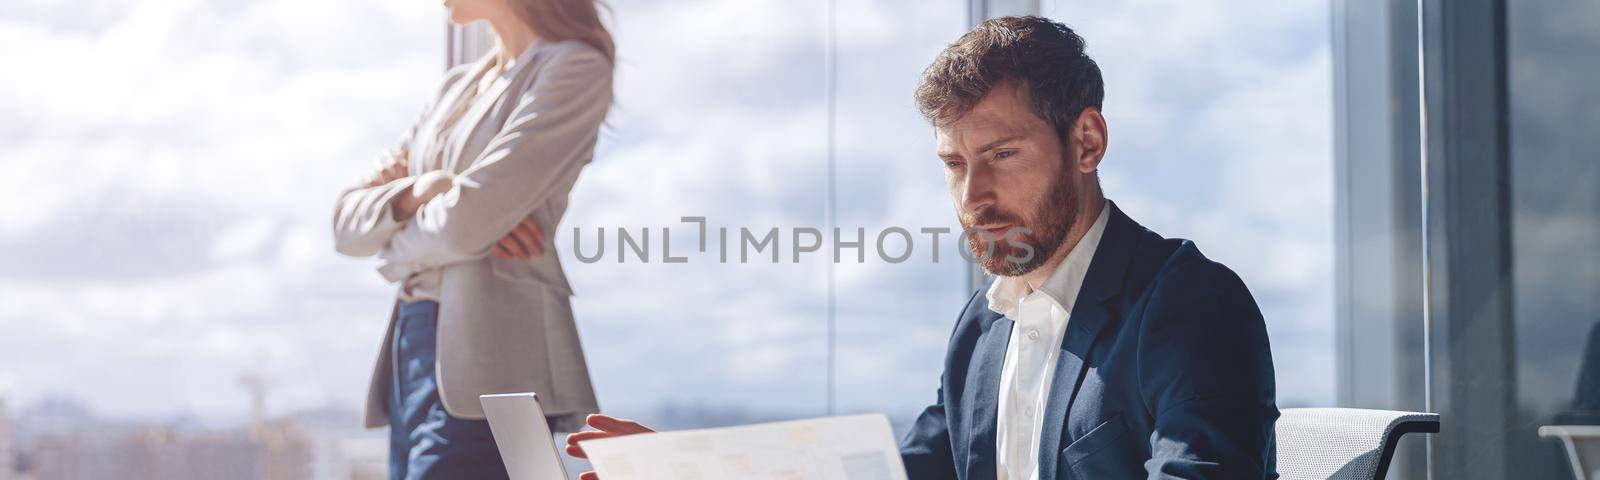 businessman analyzes work papers and charts while his colleague looks thoughtfully out the window by Yaroslav_astakhov